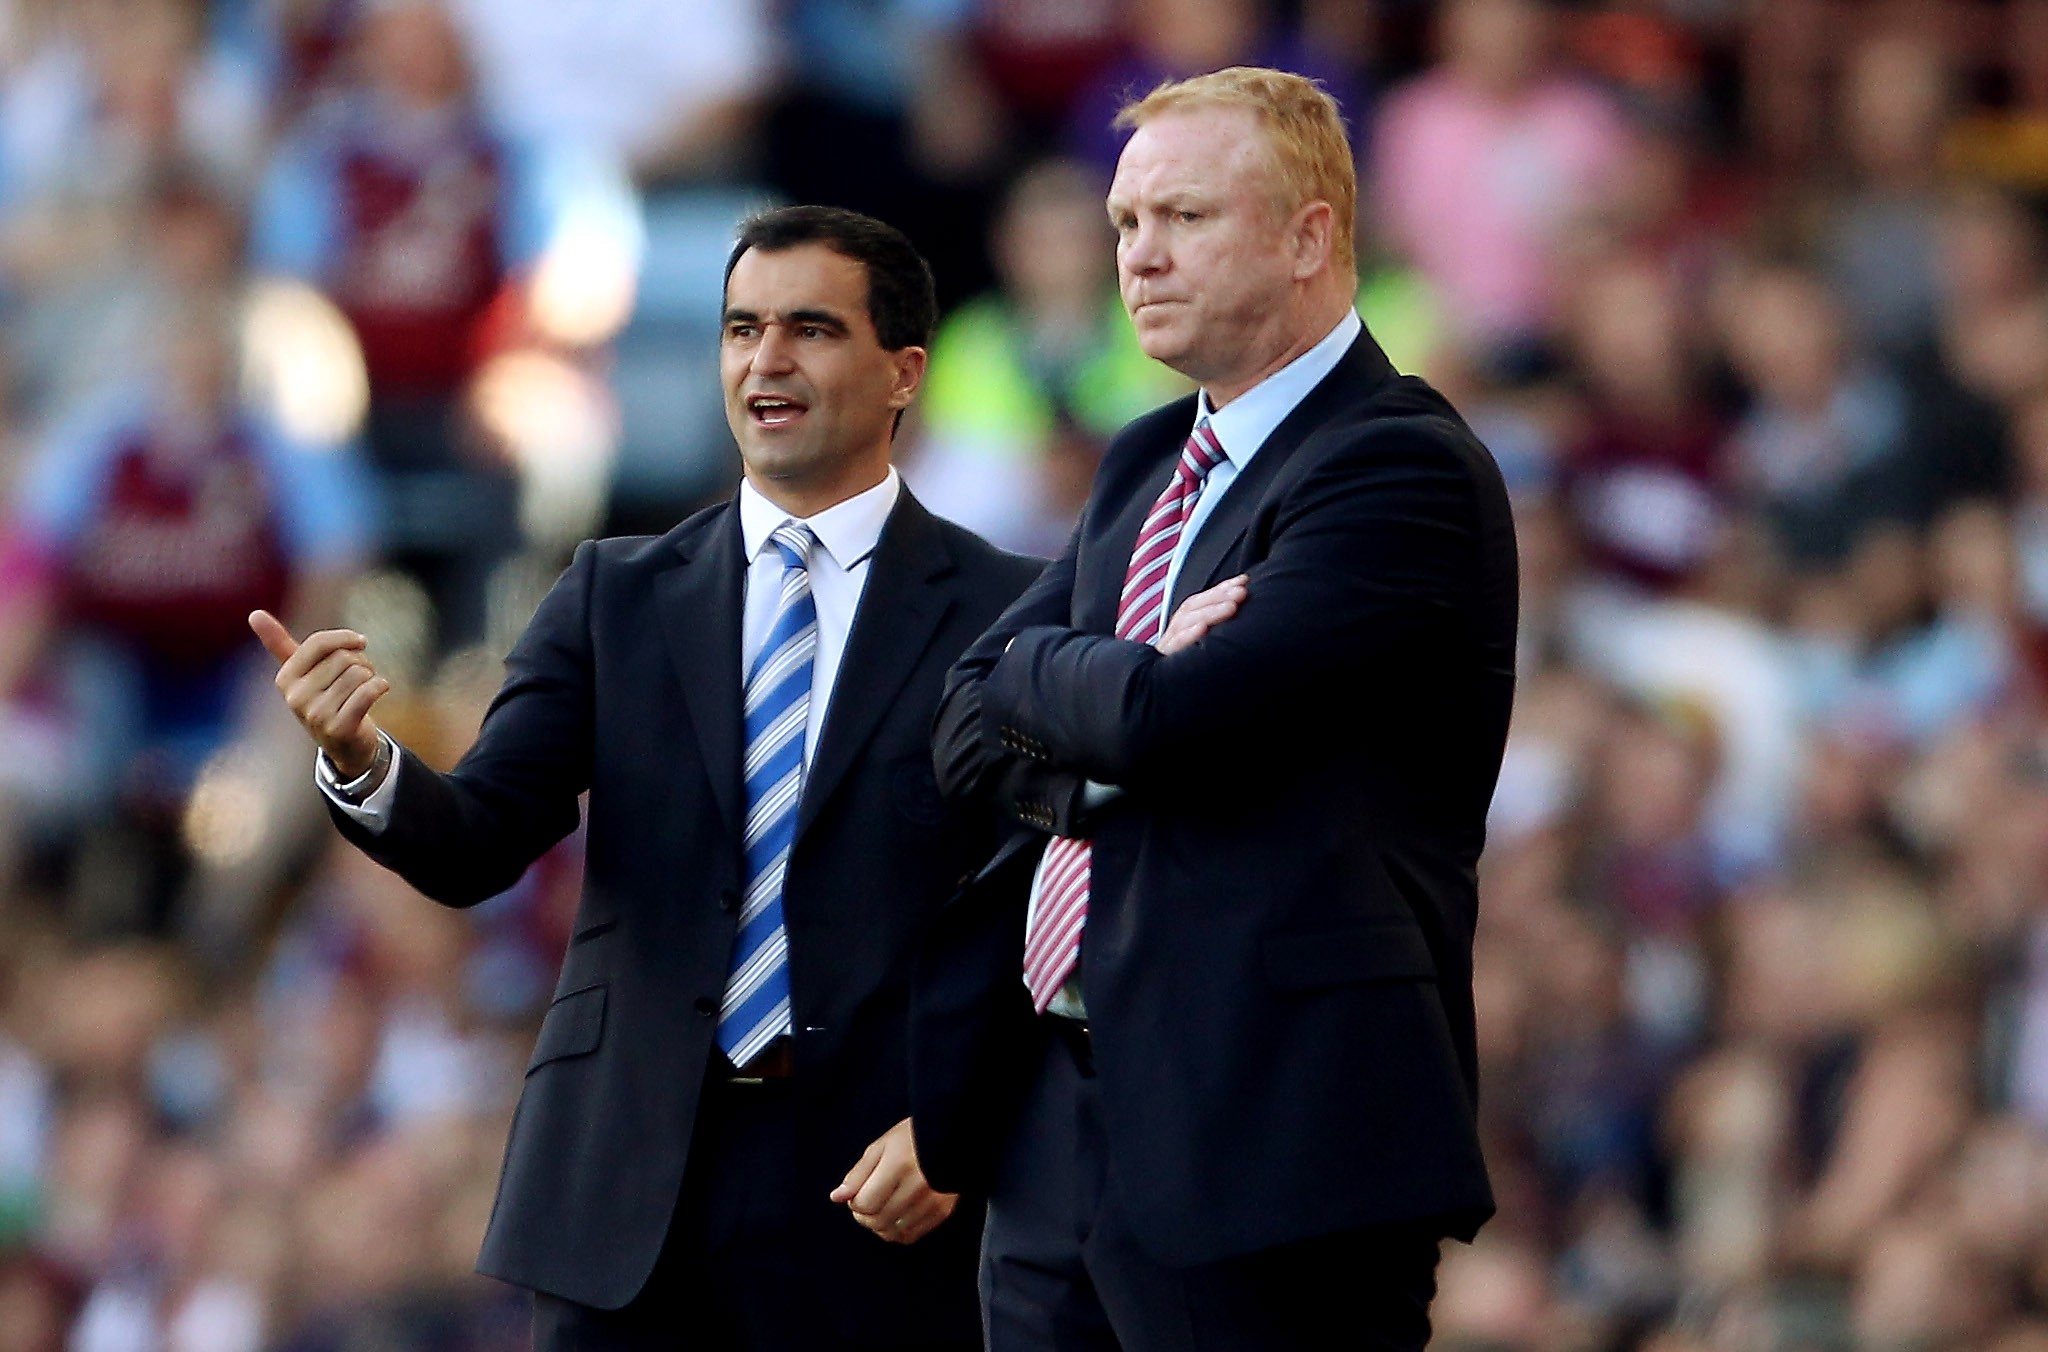 BIRMINGHAM, ENGLAND - OCTOBER 01: Wigan manager Roberto Martinez (L) with Aston Villa manager Alex McLeish during the Barclays Premier League match between Aston Villa and Wigan Athletic at Villa Park on October 1, 2011 in Birmingham, England. (Photo by Scott Heavey/Getty Images)